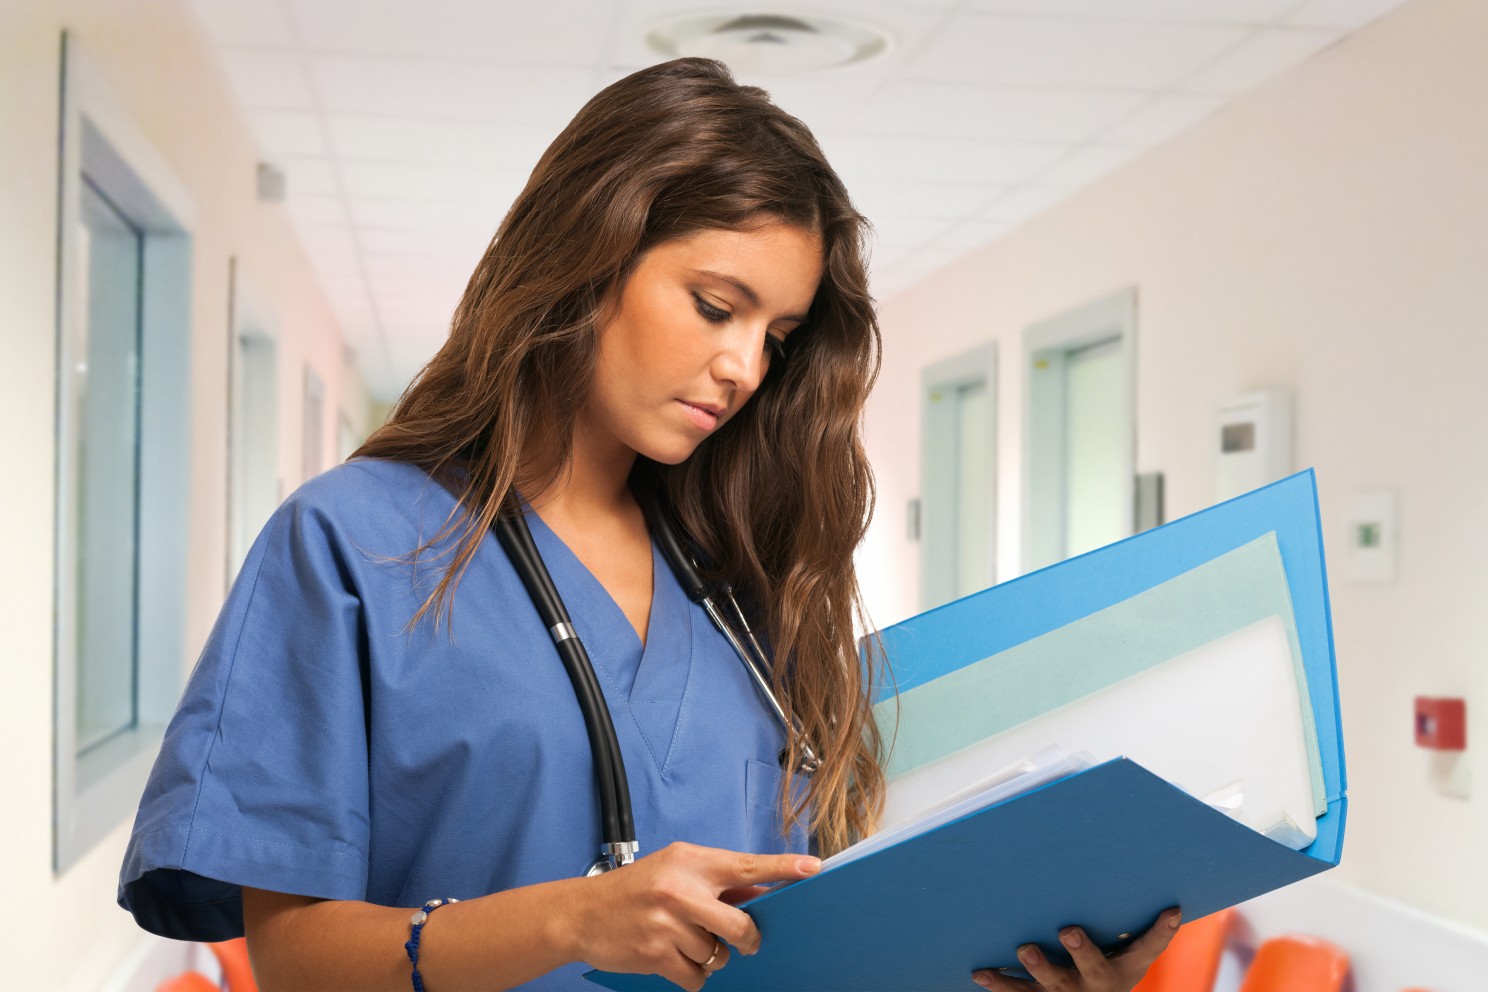 A nurse with long brown wavy hair wearing blue scrubs standing in a hallway reading a patient file.